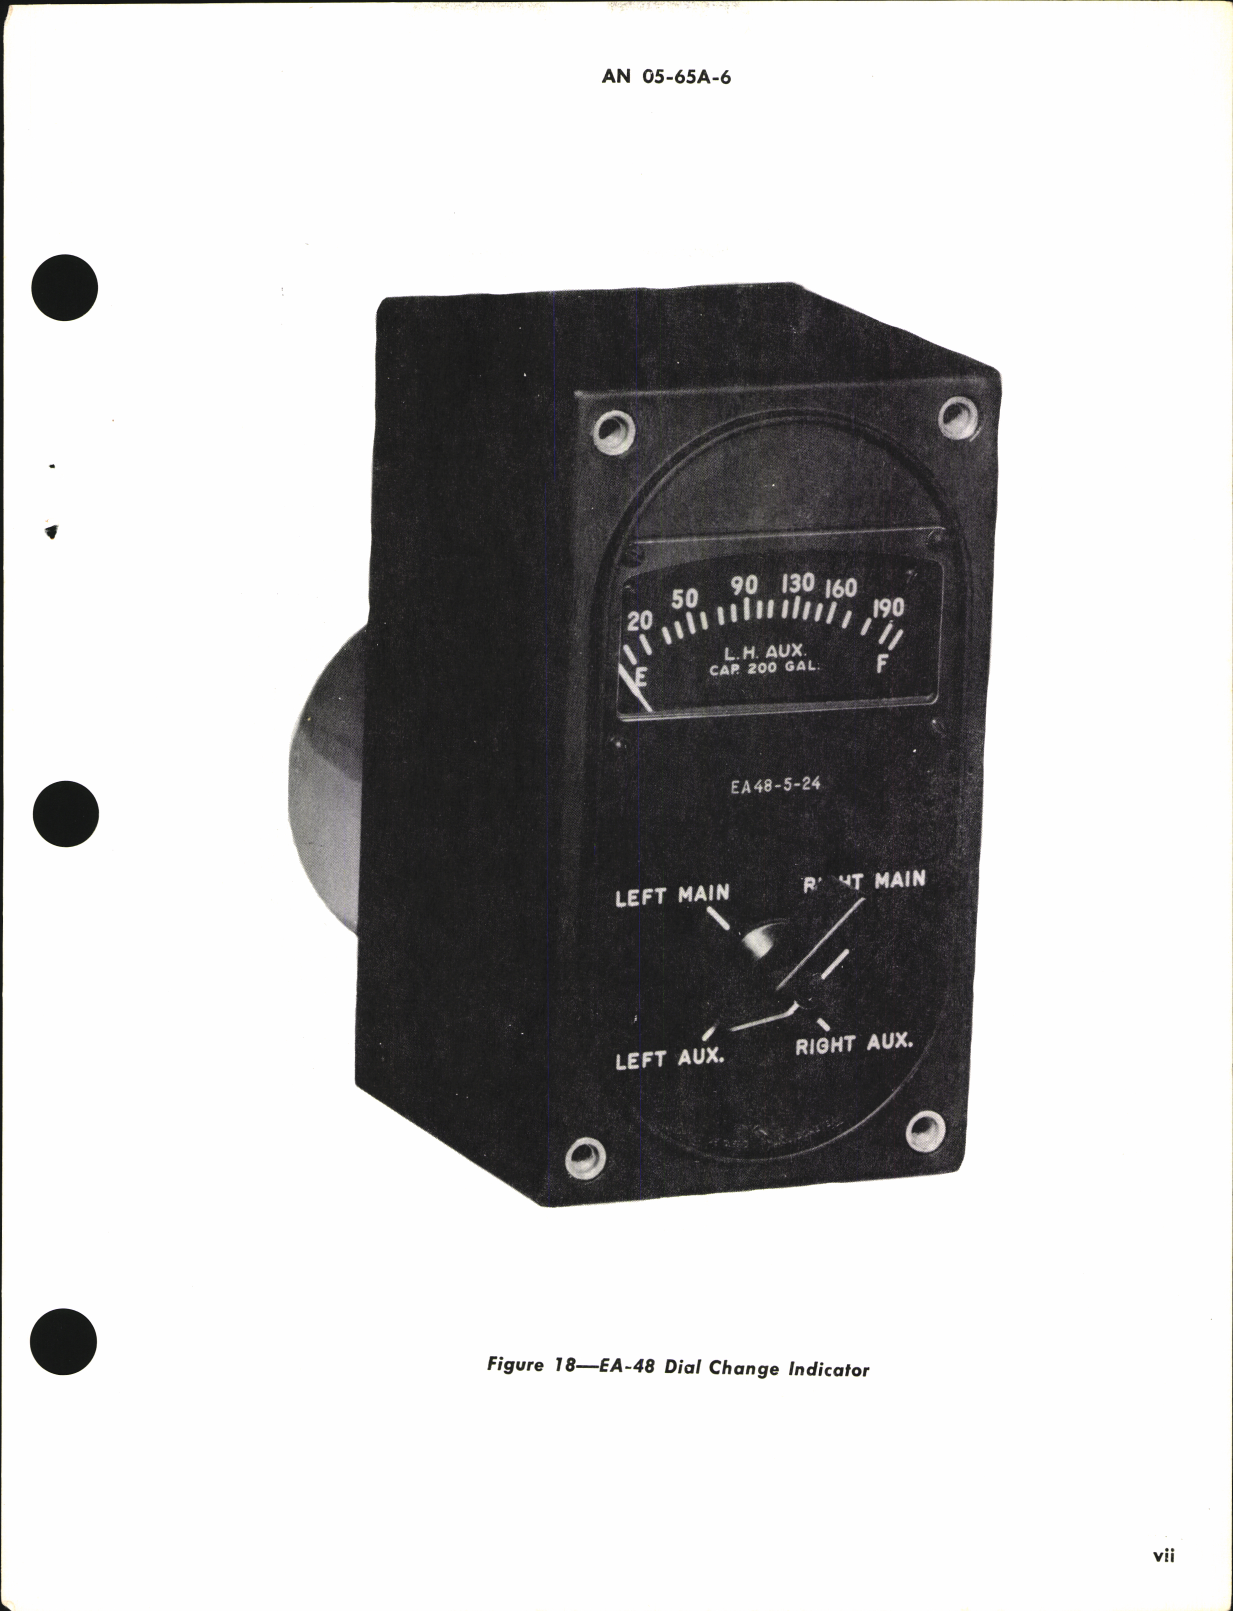 Sample page 7 from AirCorps Library document: Operation, Service, & Overhaul Instructions for Electrically Operated Fuel Level Gages